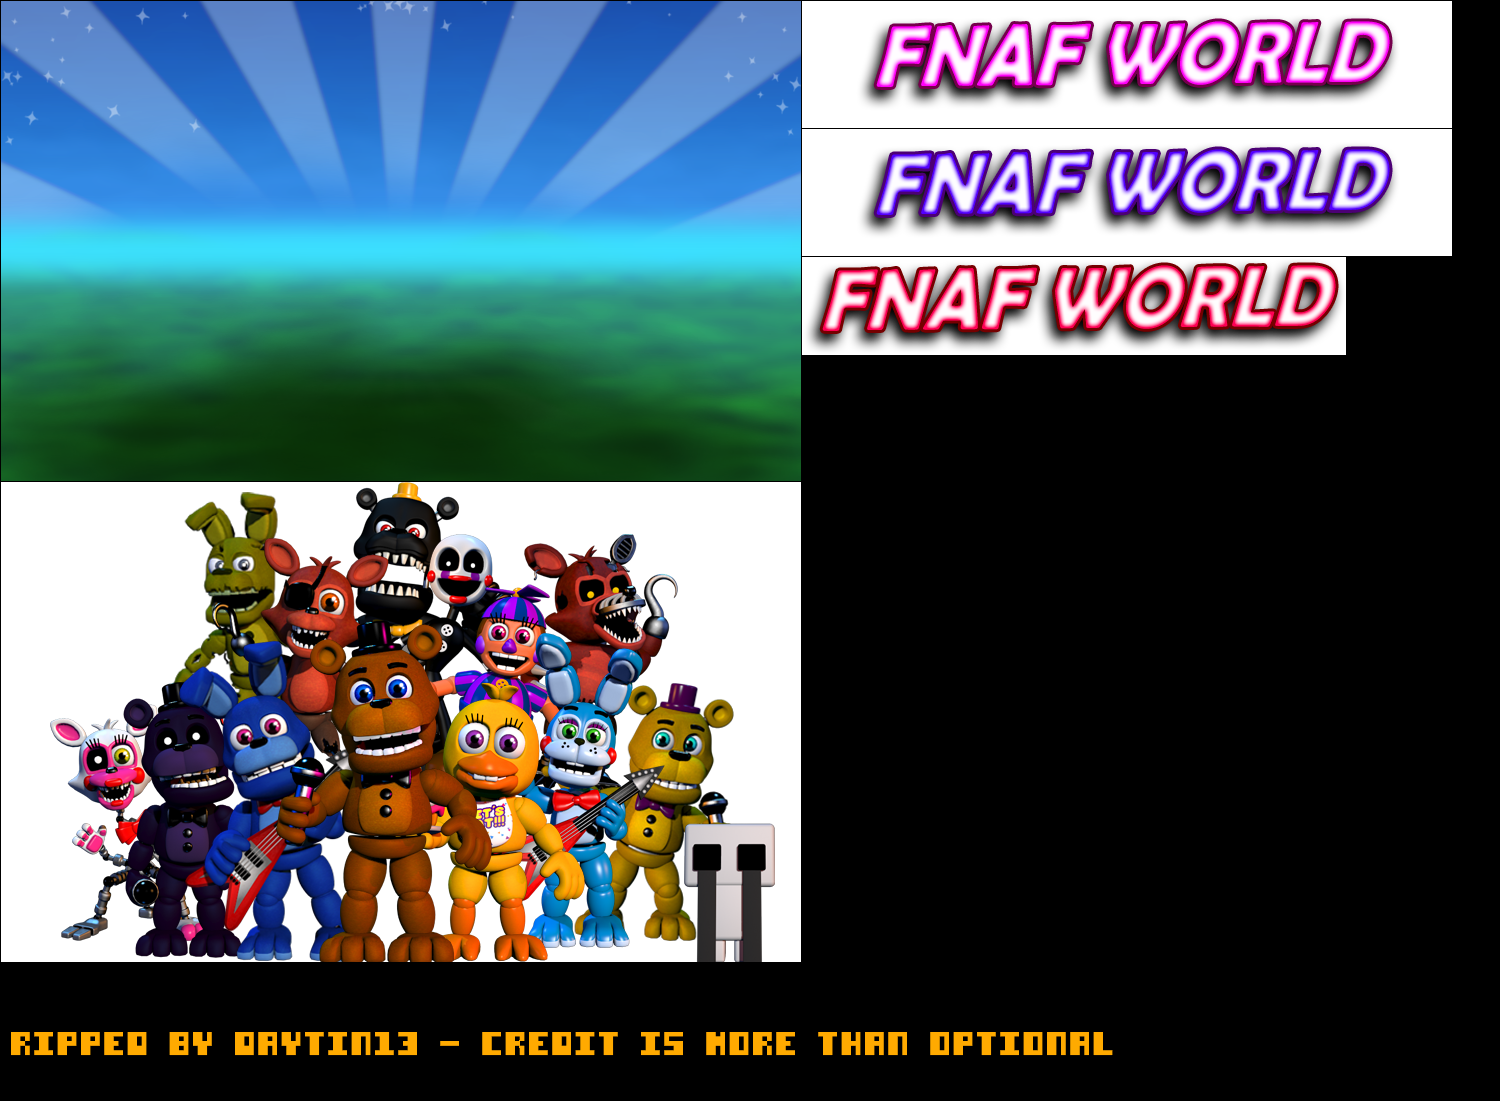 PC / Computer - Five Nights at Freddy's: Sister Location - Title Screen -  The Spriters Resource